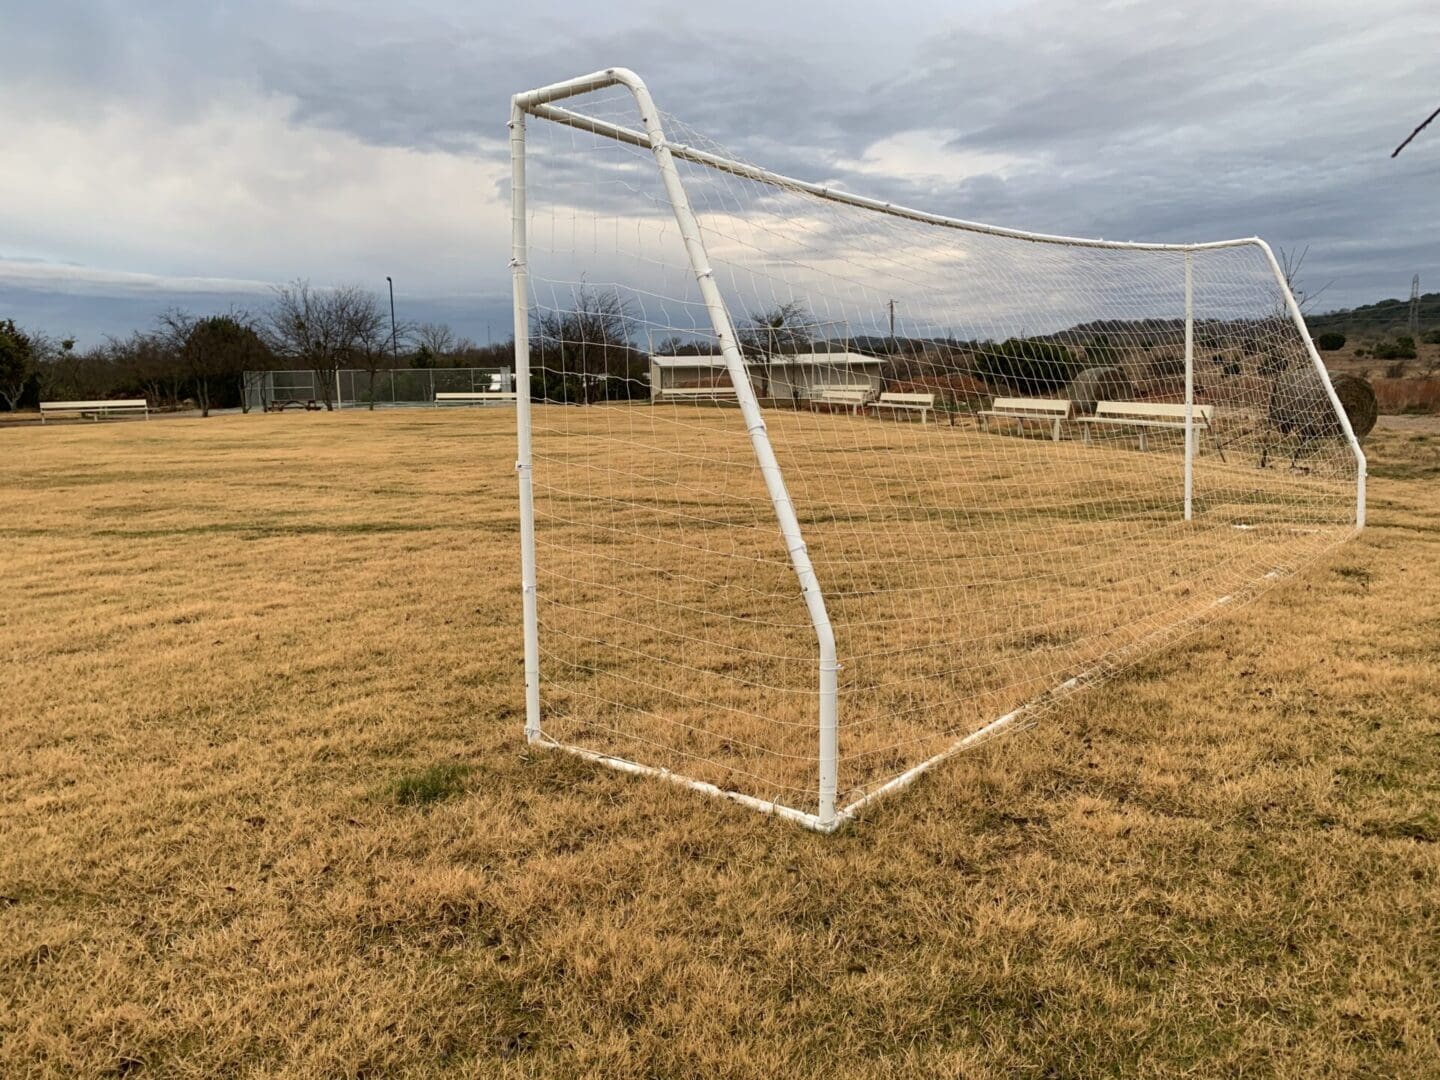 A soccer goal in the middle of an empty field.